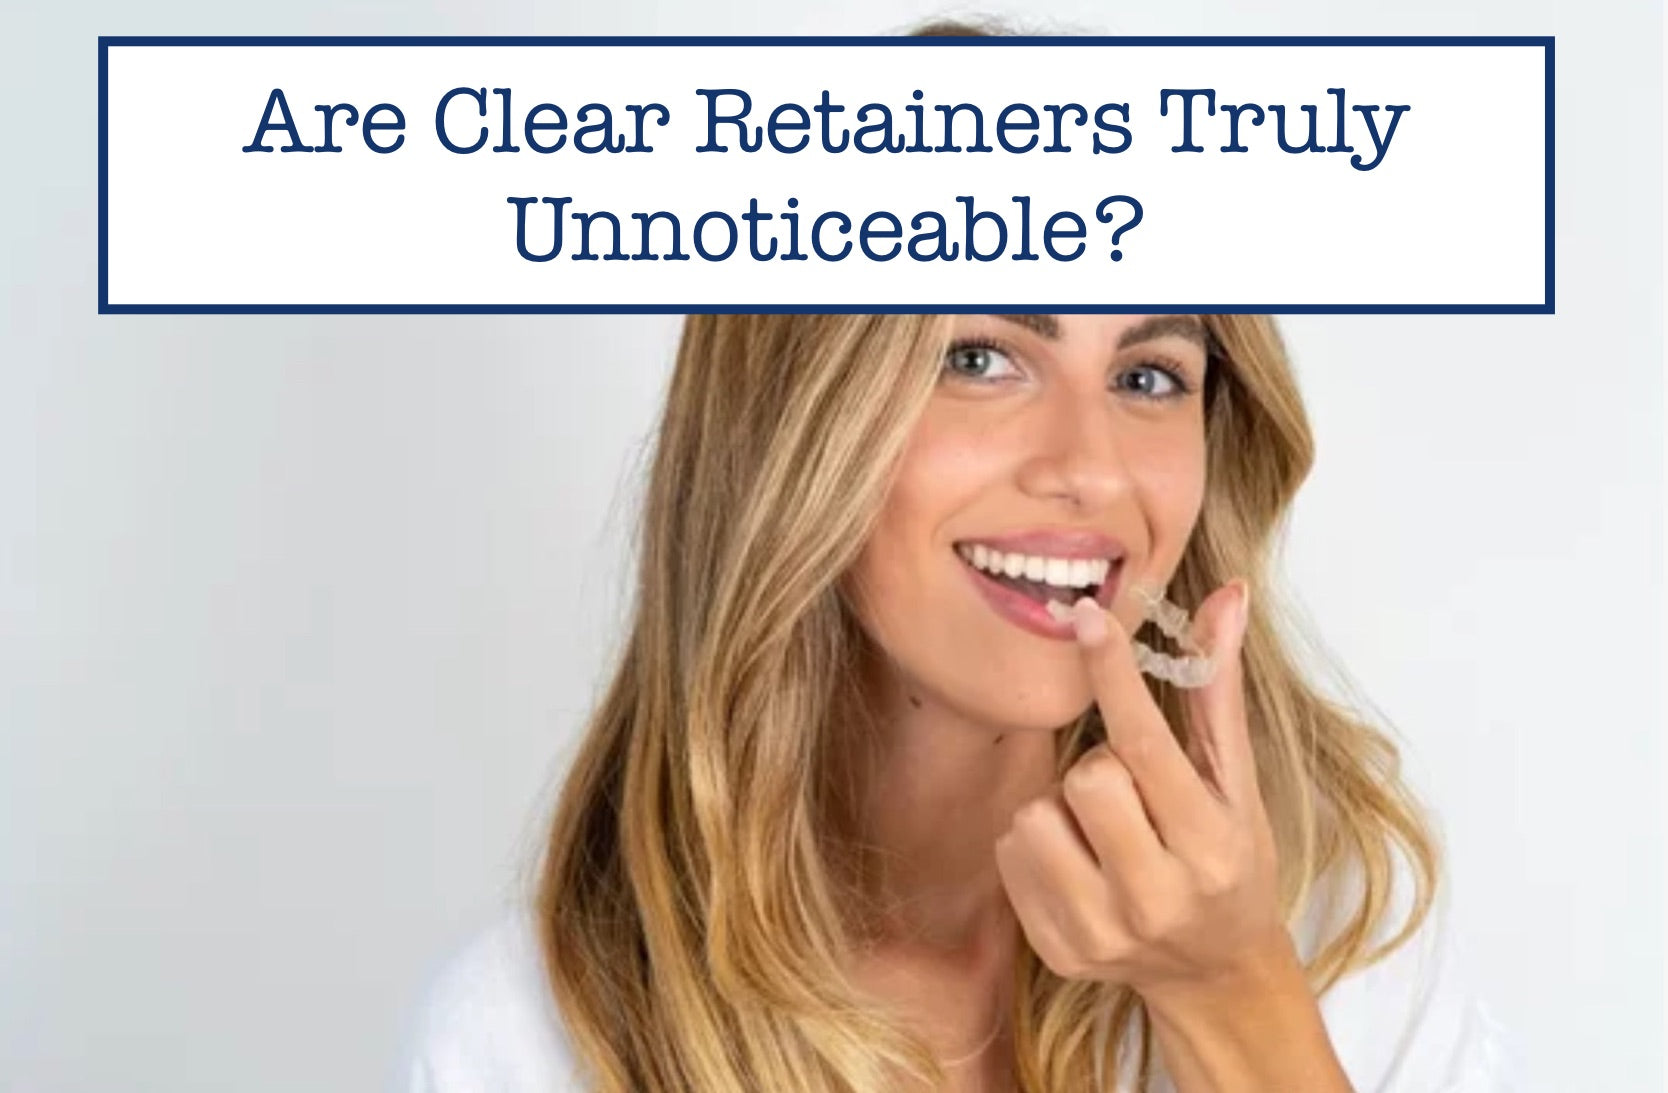 Teeth whitening instructions with clear orthodontic retainers